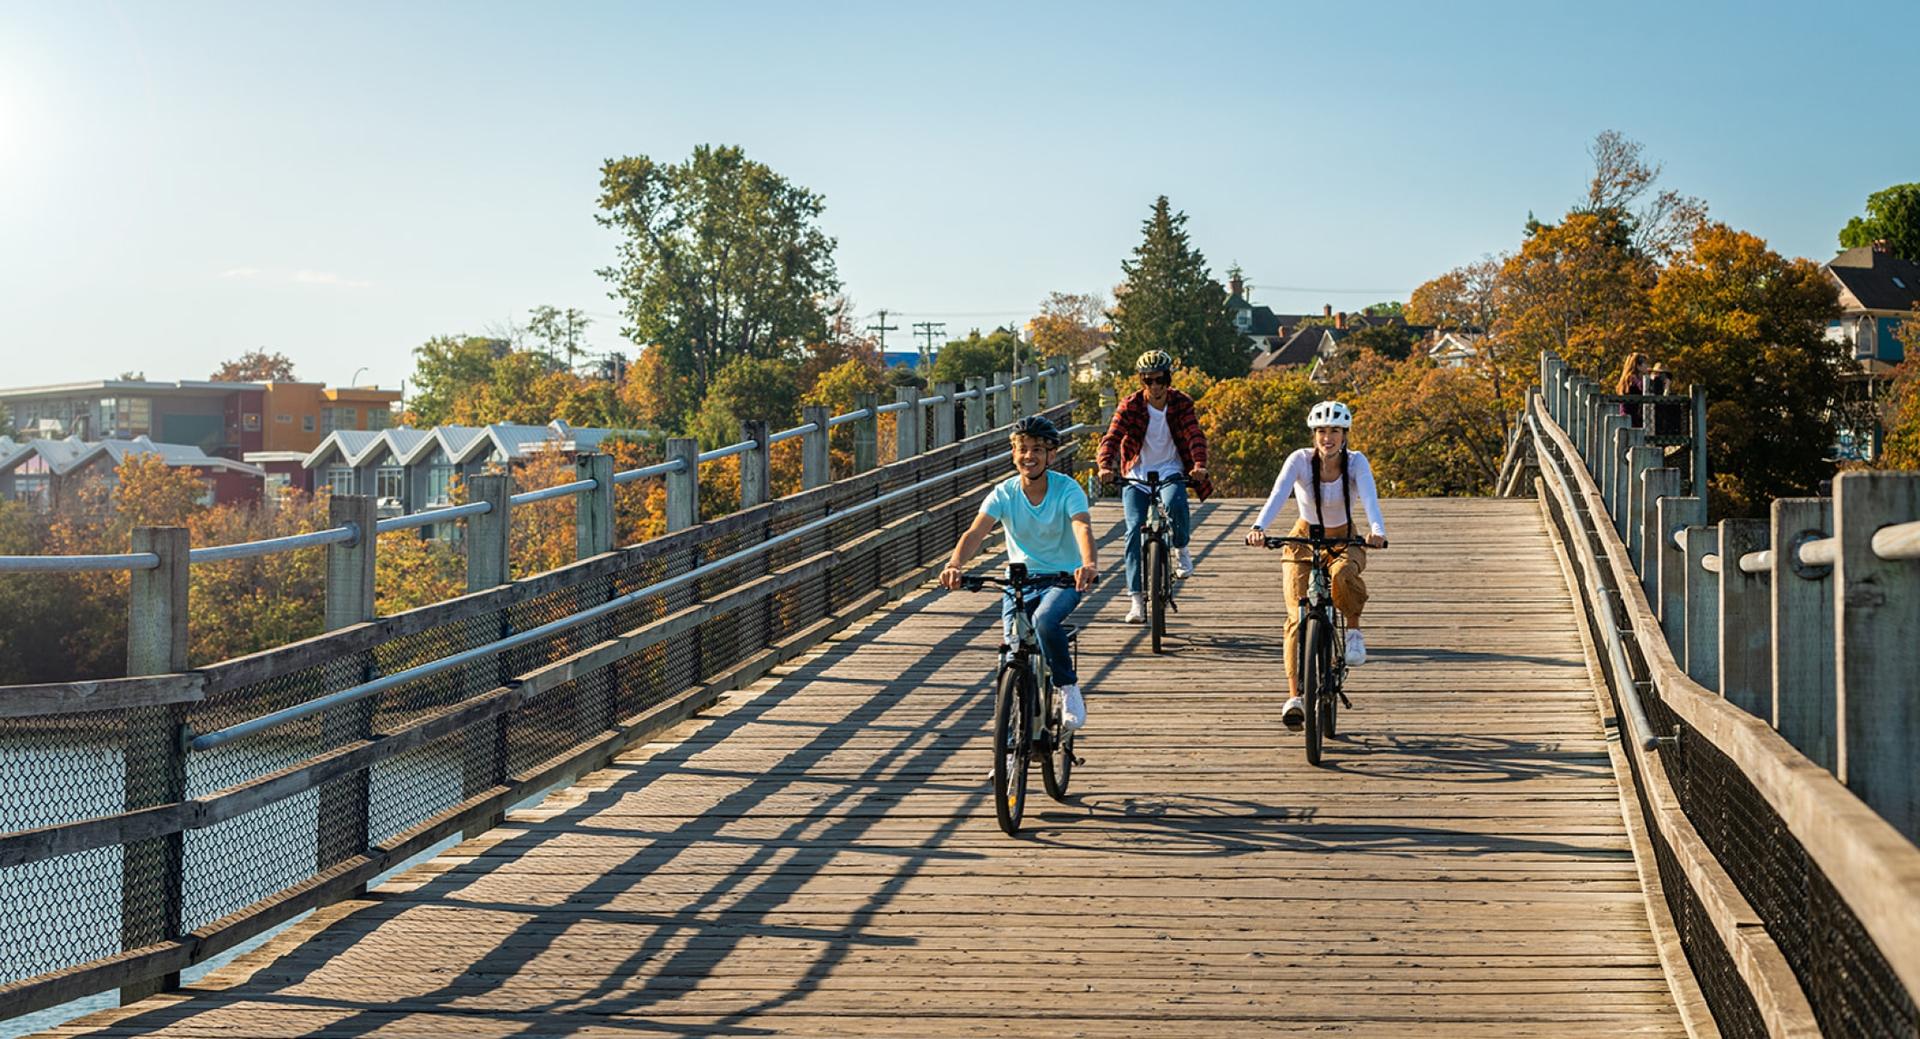 A group of friends cycling along the Selkirk Trestle in Victoria, BC